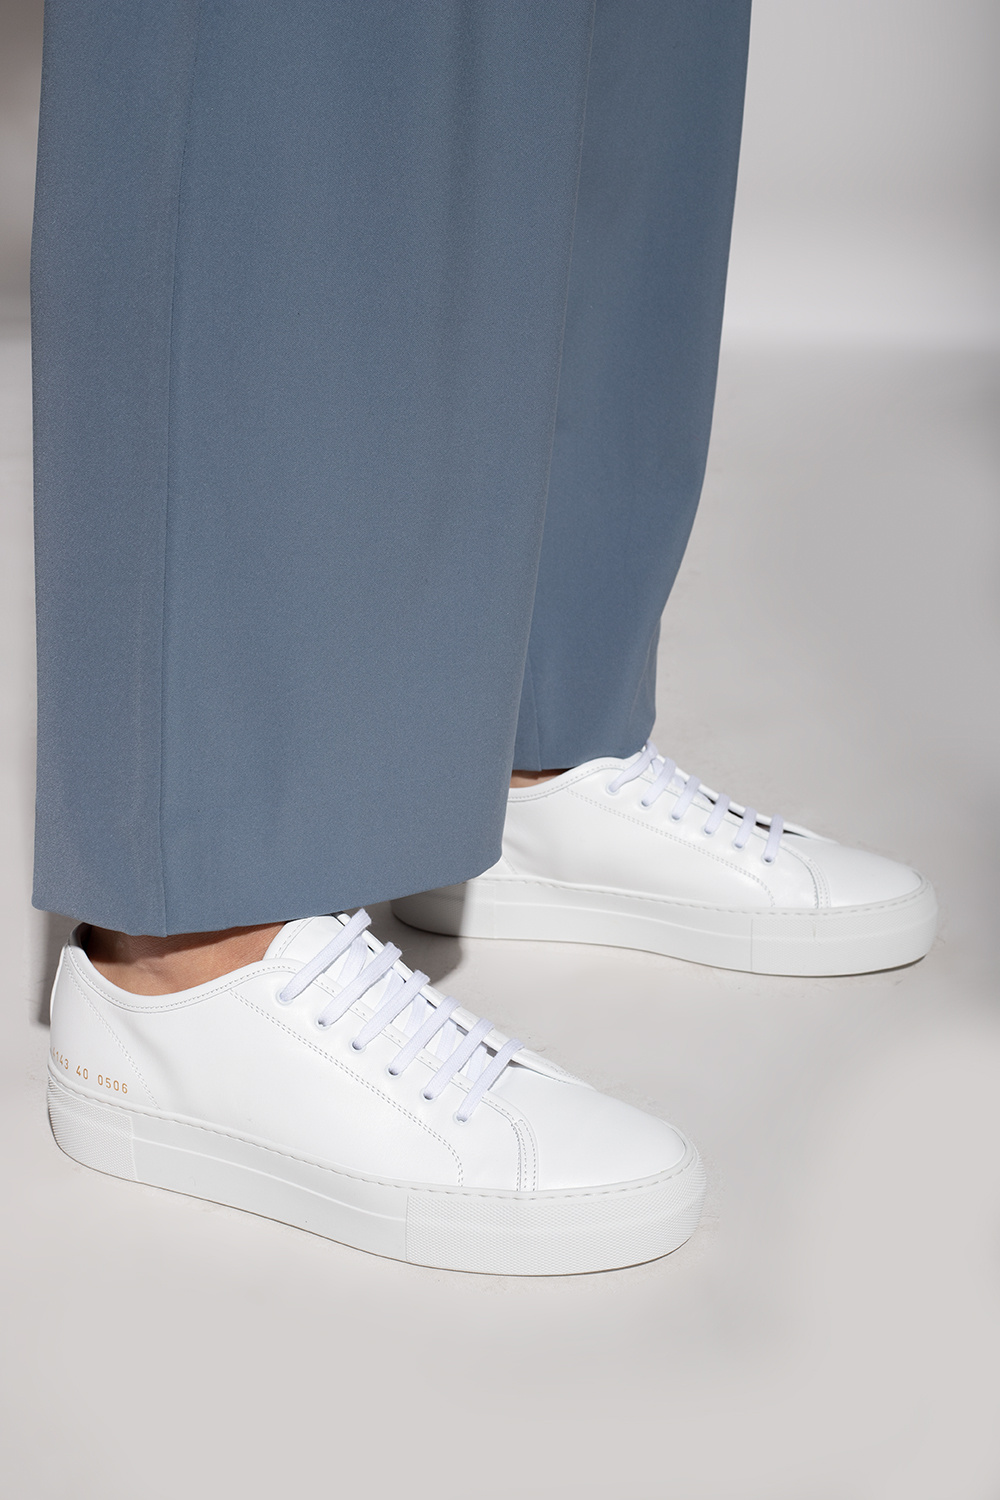 Ruckus Soldat på vegne af IetpShops | shoes will have you well-heeled all year round | Common Projects  'Tournament' sneakers | Women's Shoes